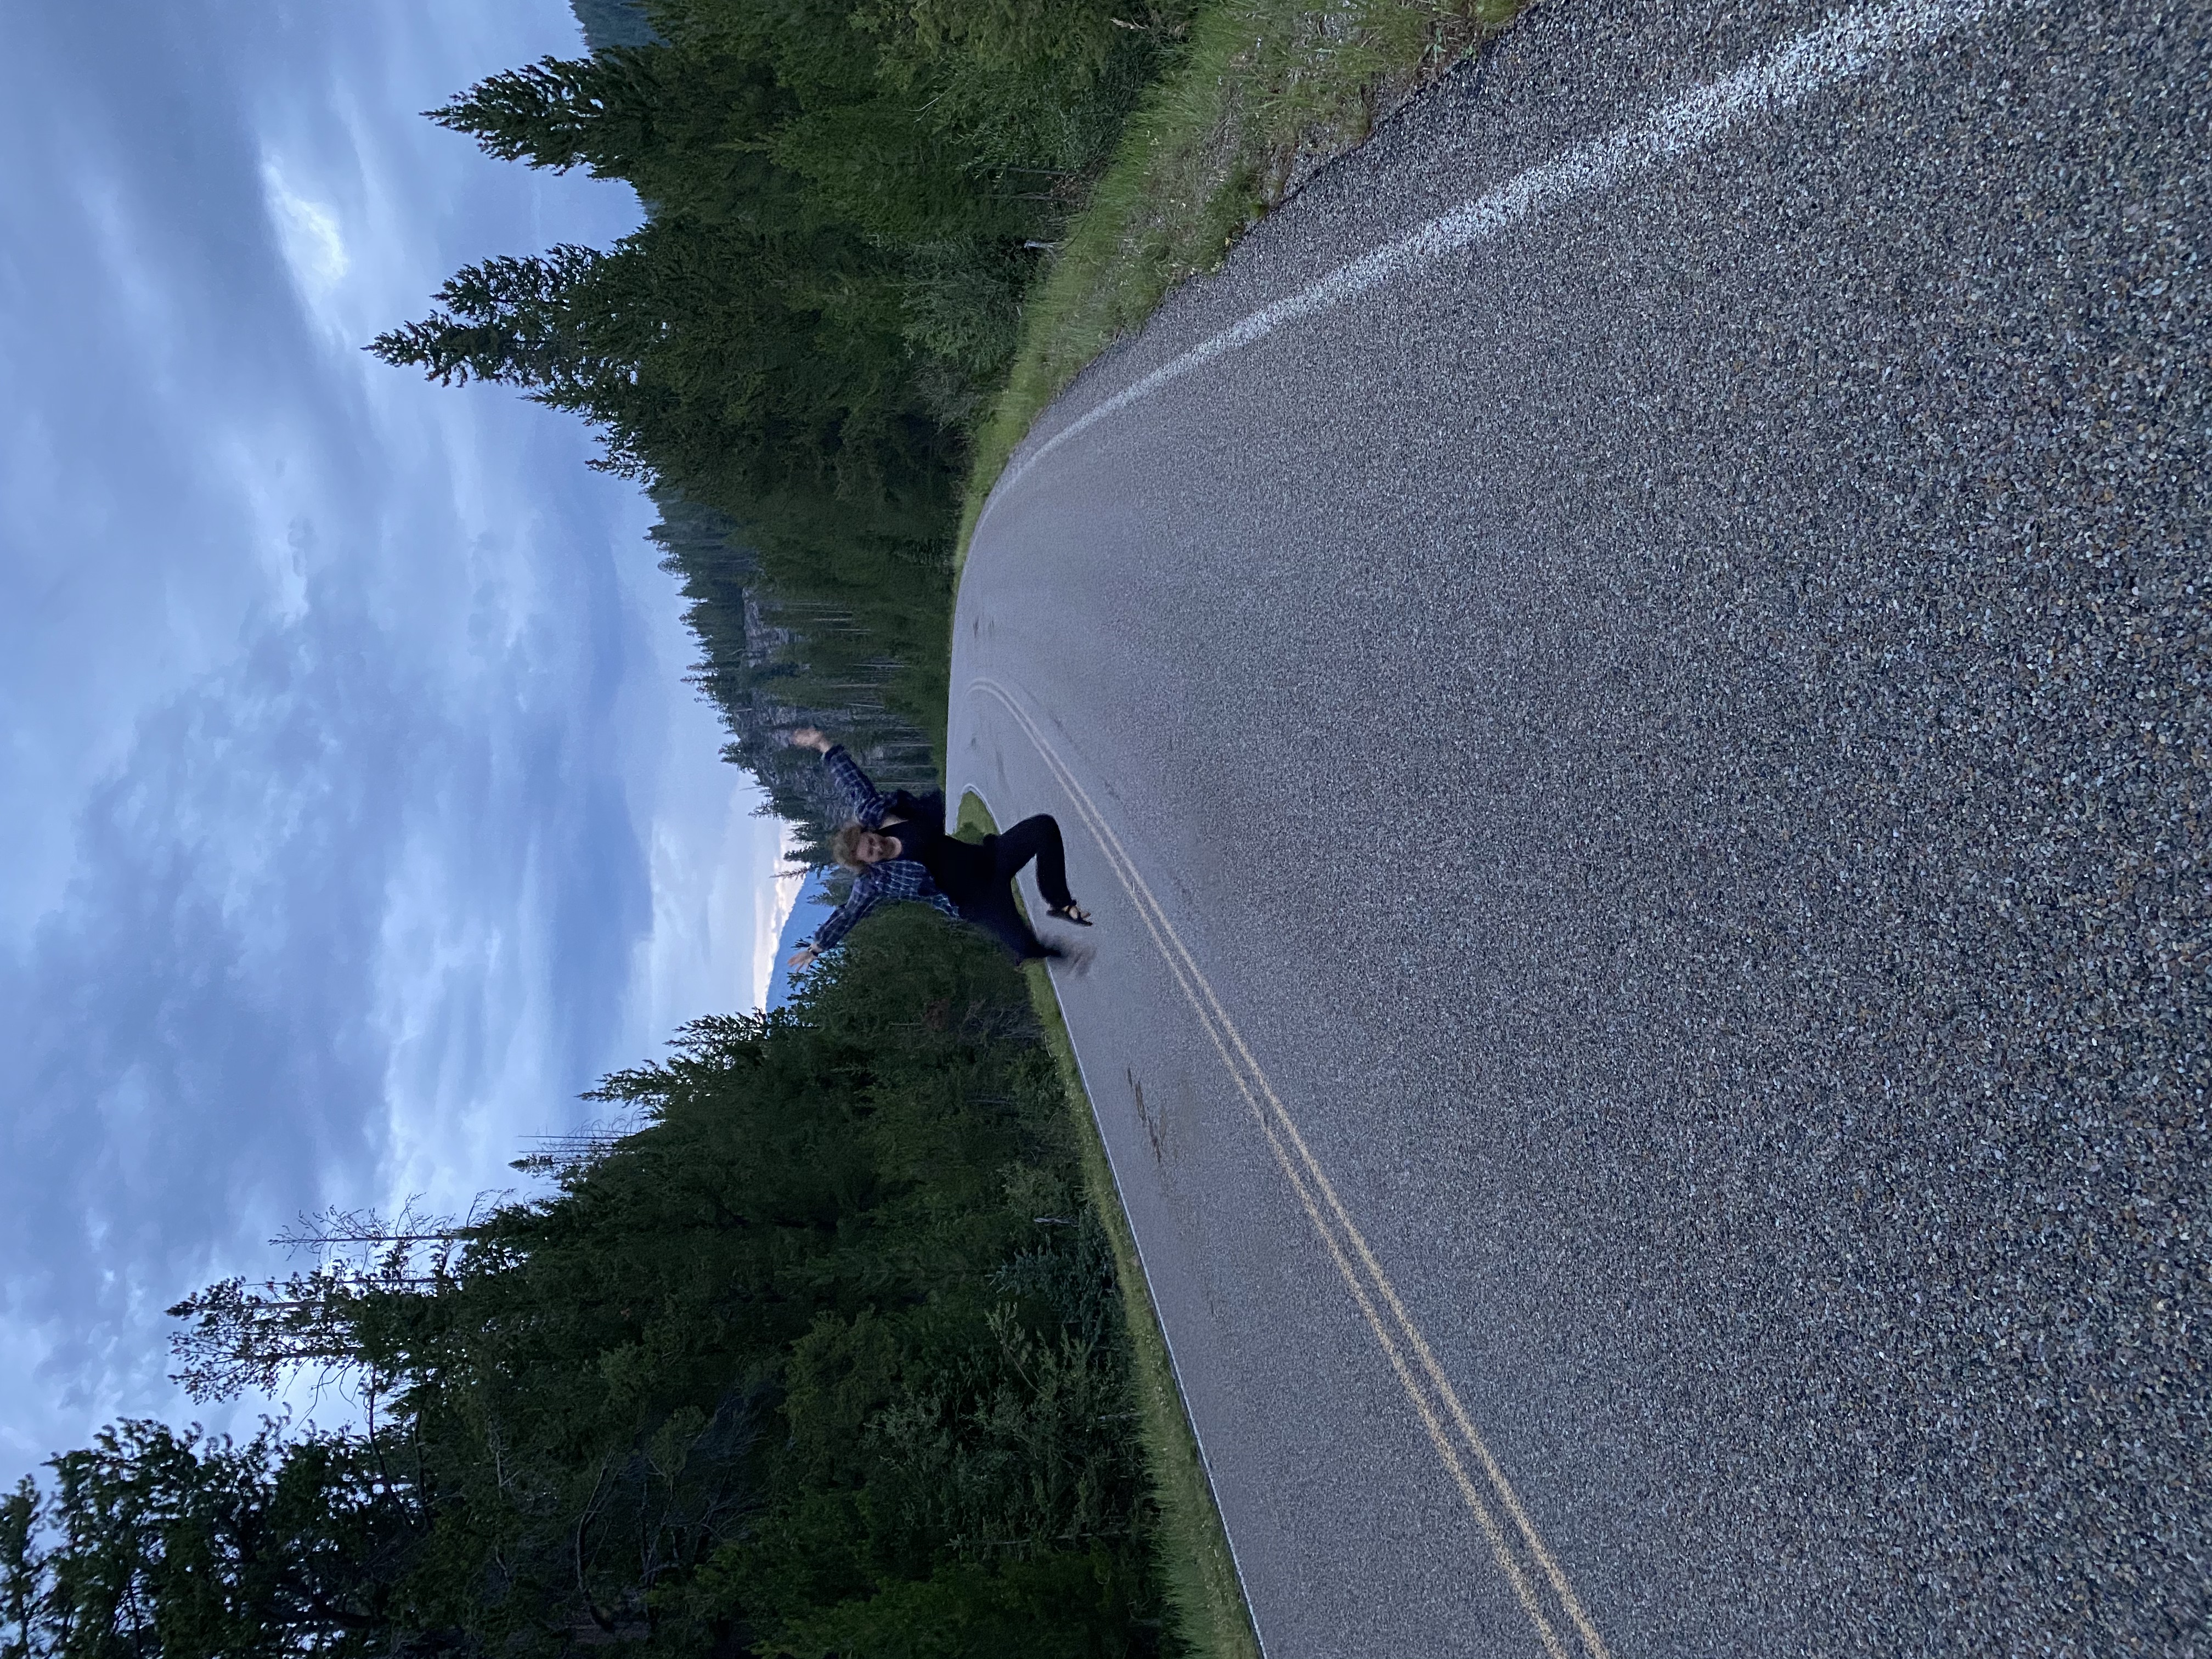 Jumping for joy in the road